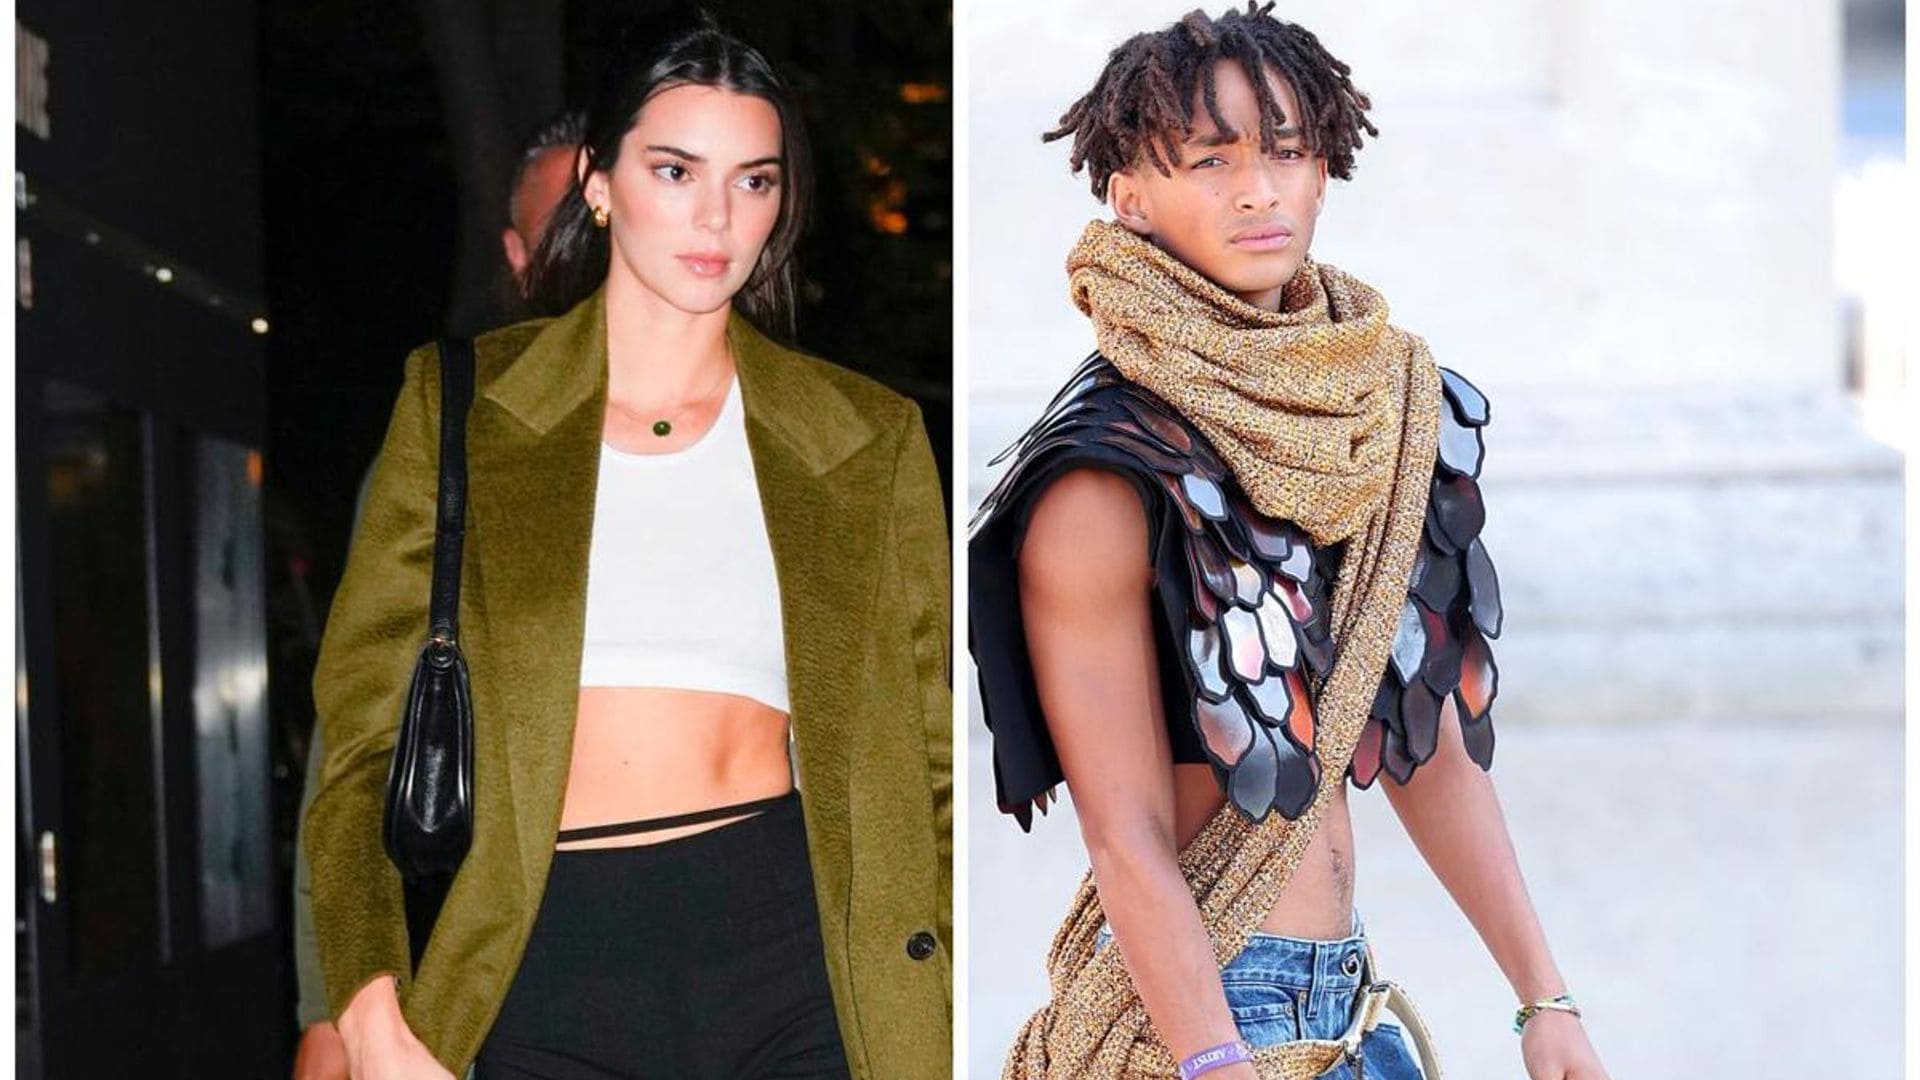 Kendall Jenner supports Jaden Smith following Kanye West’s drama in Paris